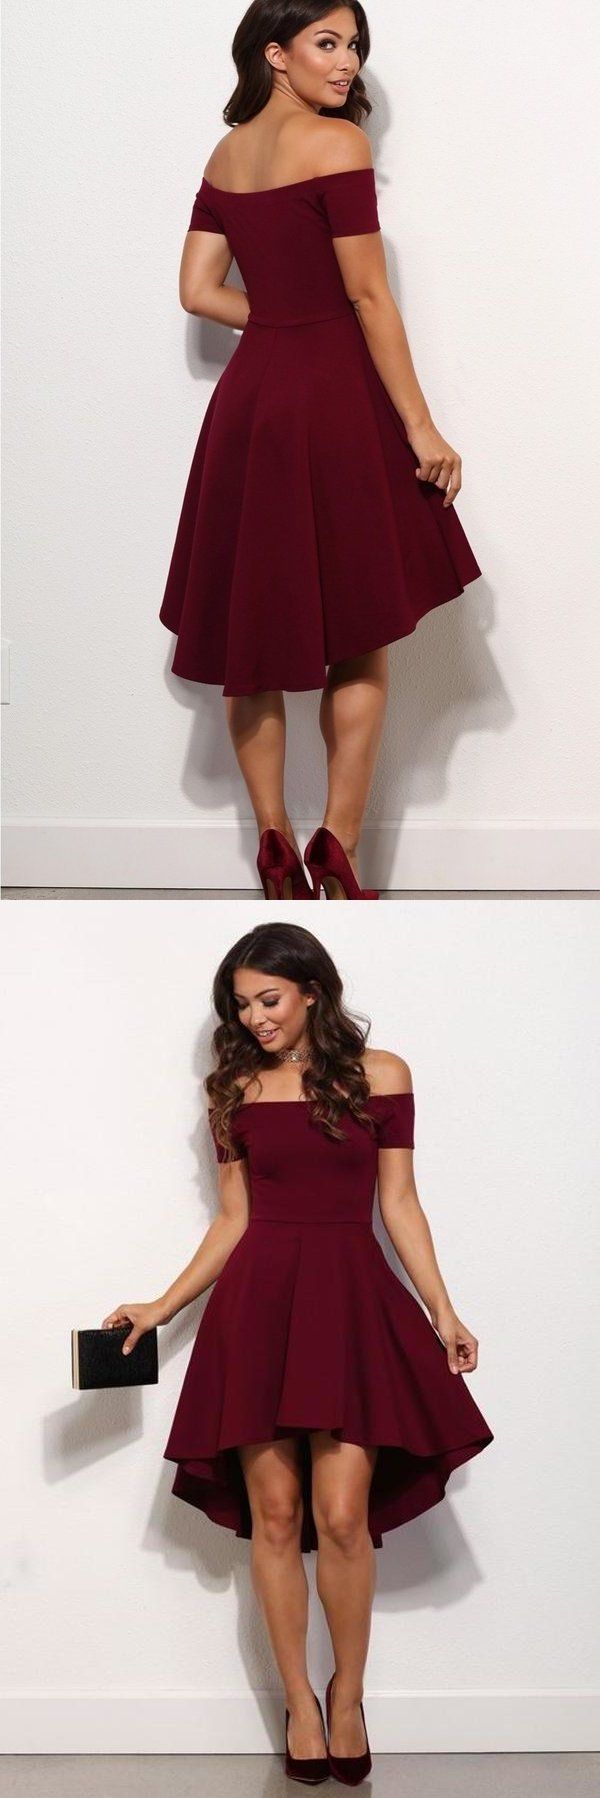 Short A Line Burgundy Off the Shoulder High Low Knee Length Satin Homecoming Dresses -   14 homecoming dress Yellow ideas